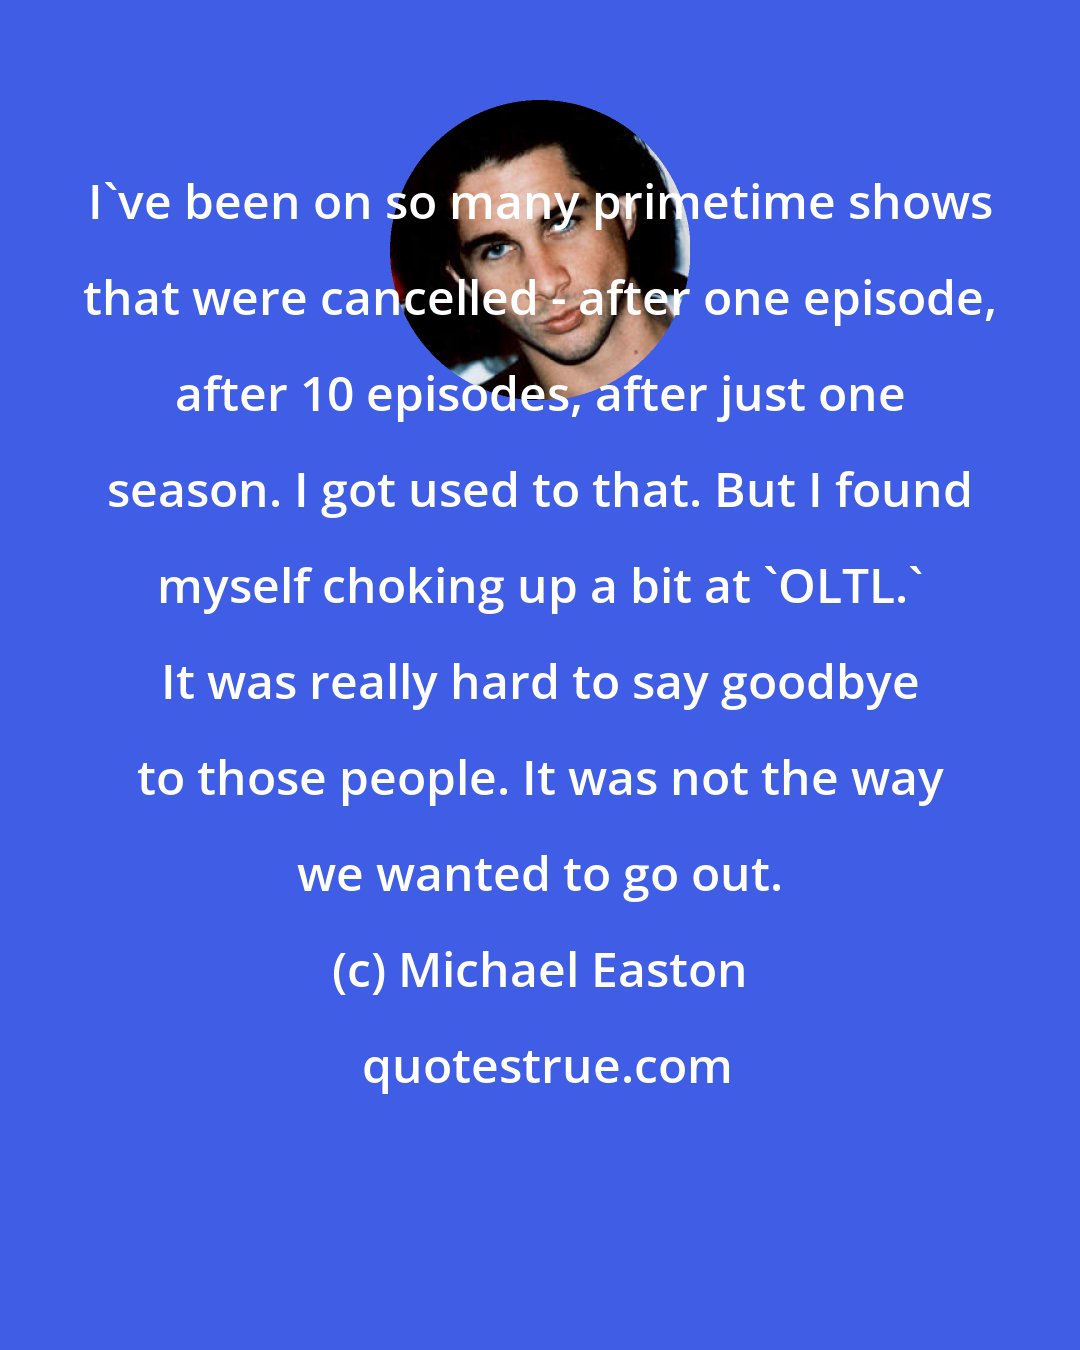 Michael Easton: I've been on so many primetime shows that were cancelled - after one episode, after 10 episodes, after just one season. I got used to that. But I found myself choking up a bit at 'OLTL.' It was really hard to say goodbye to those people. It was not the way we wanted to go out.